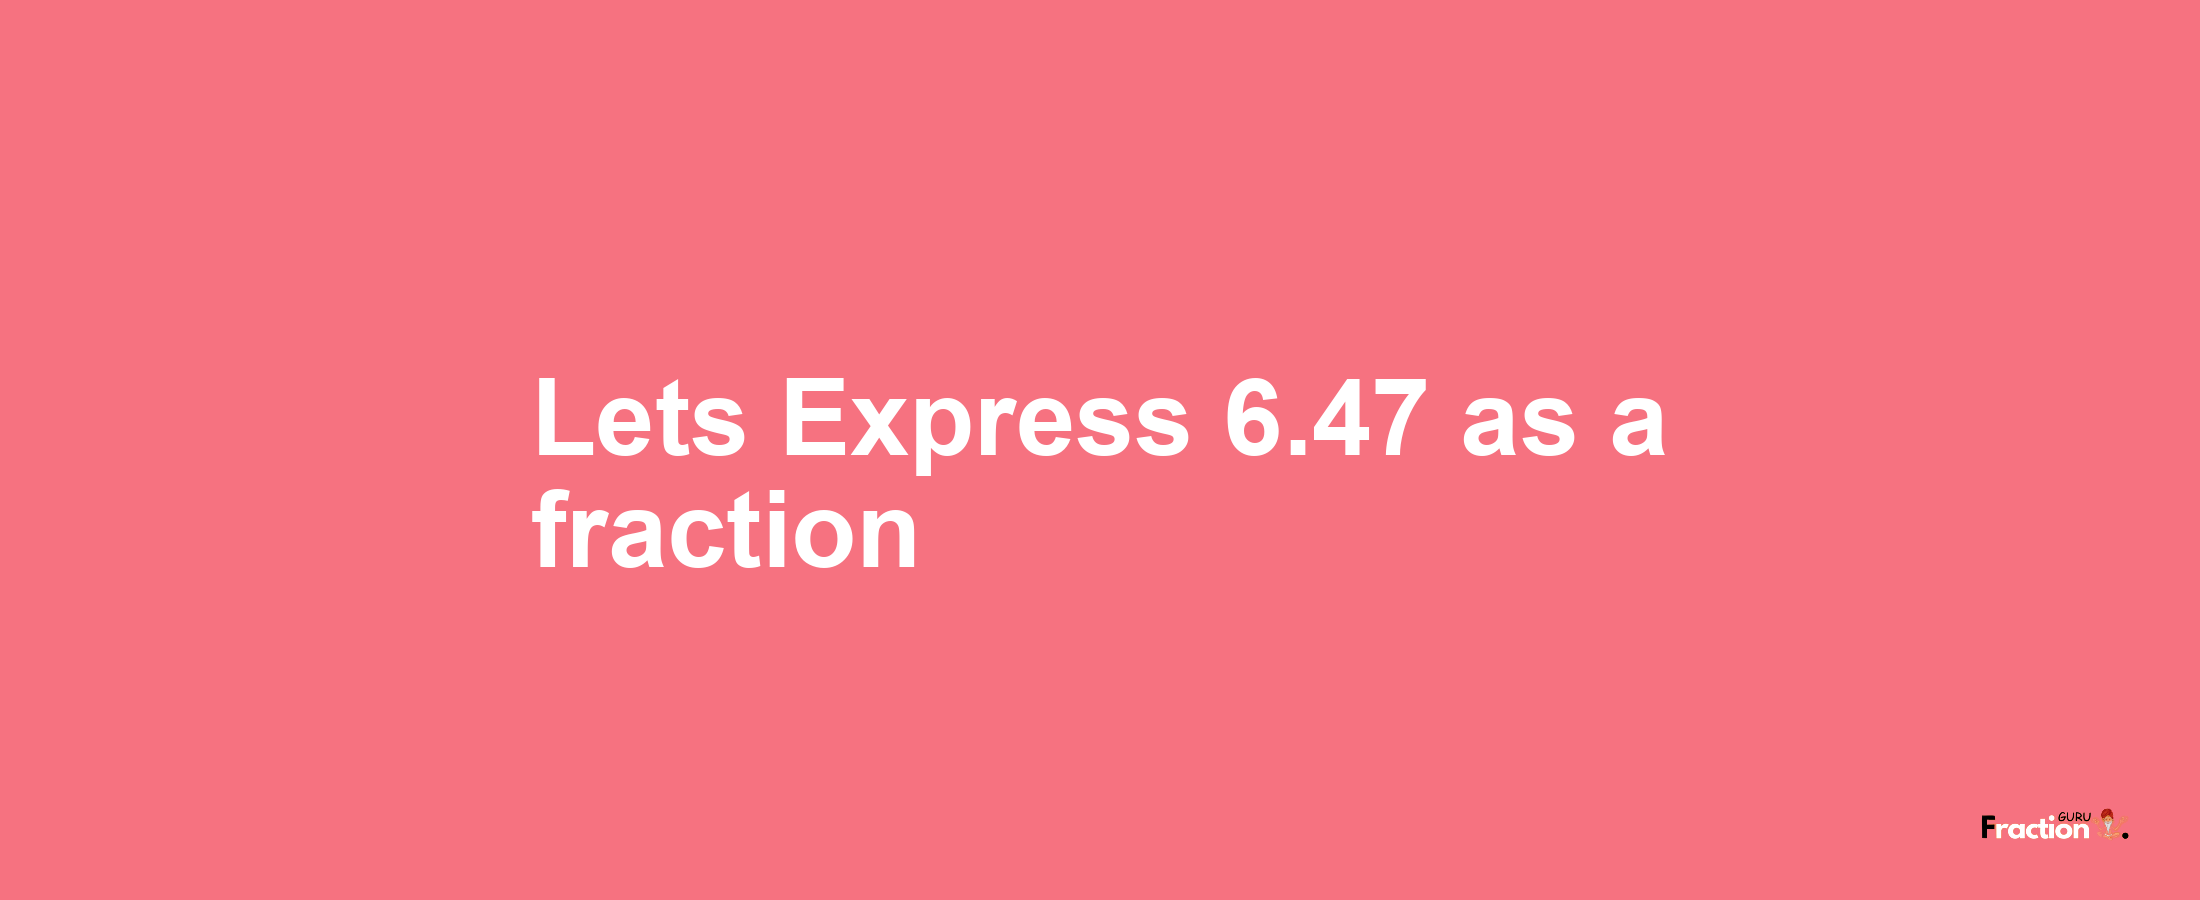 Lets Express 6.47 as afraction